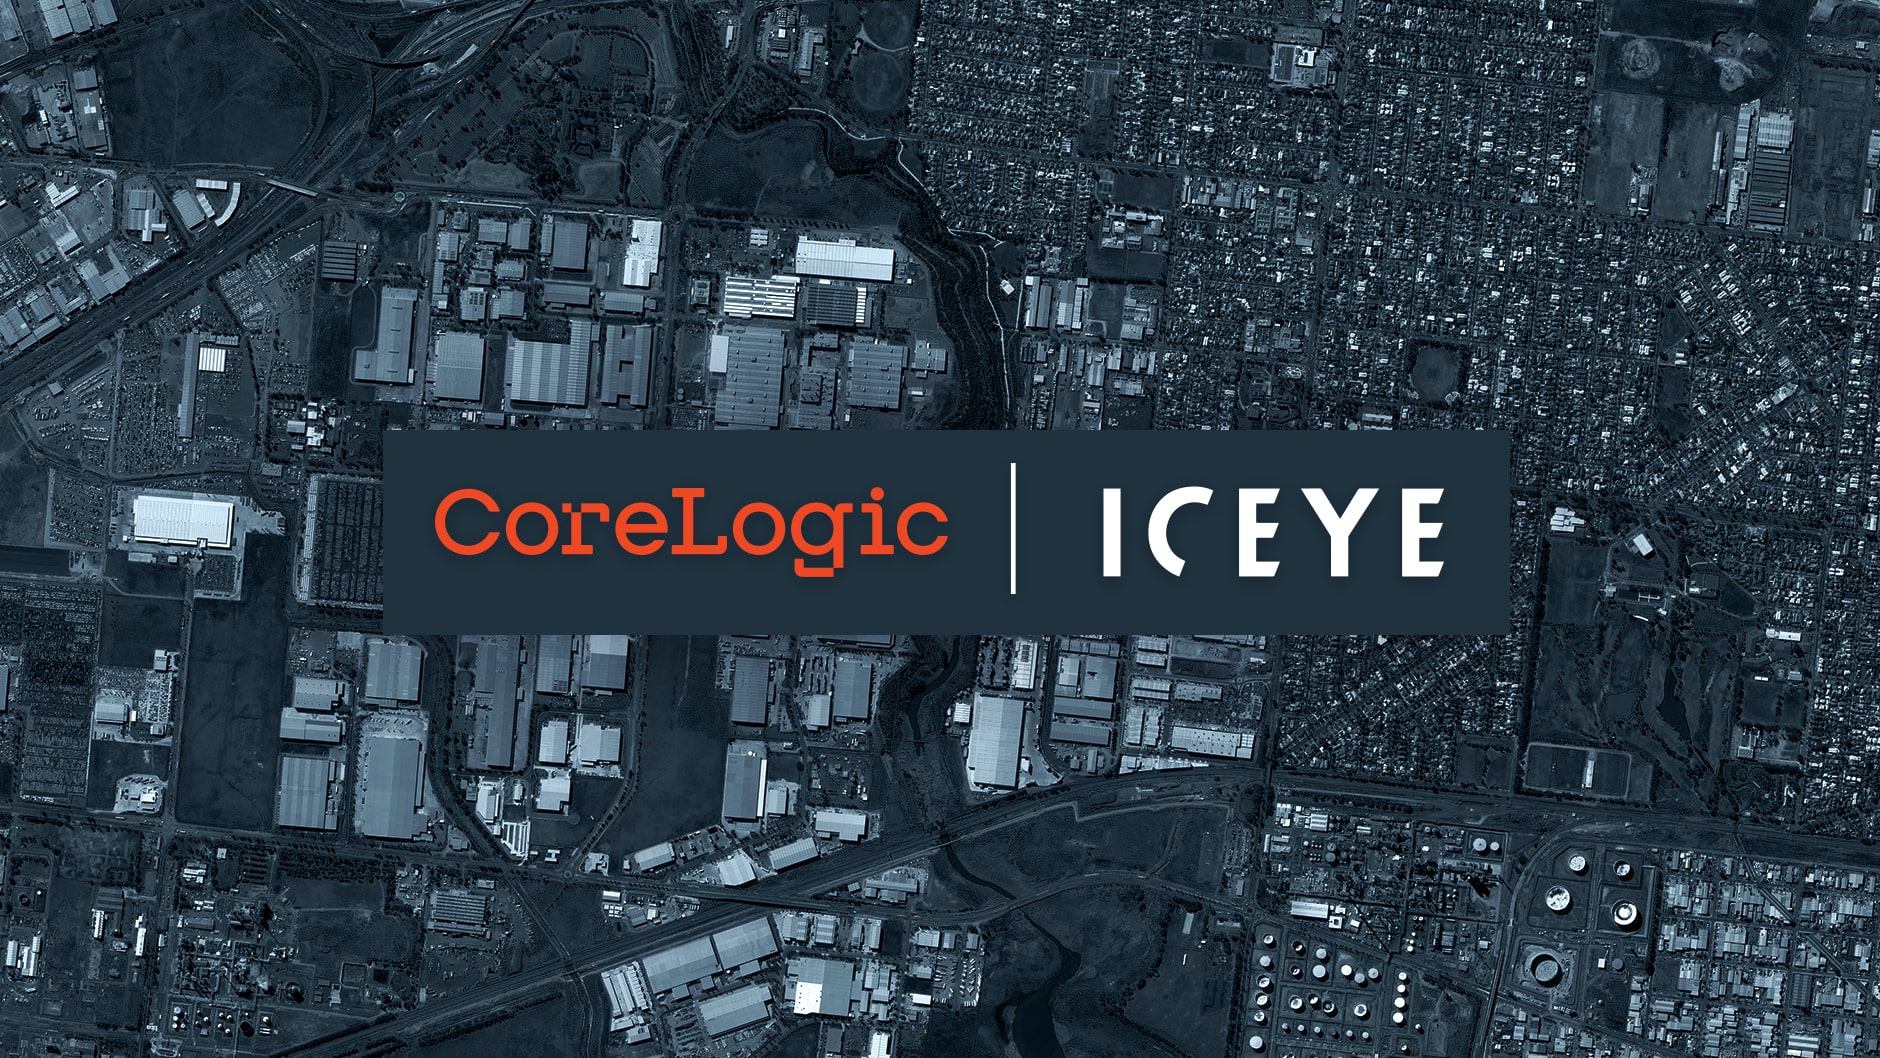 CoreLogic’s property data and ICEYE’s natural catastrophe insights power innovative disaster response solution for the banking sector